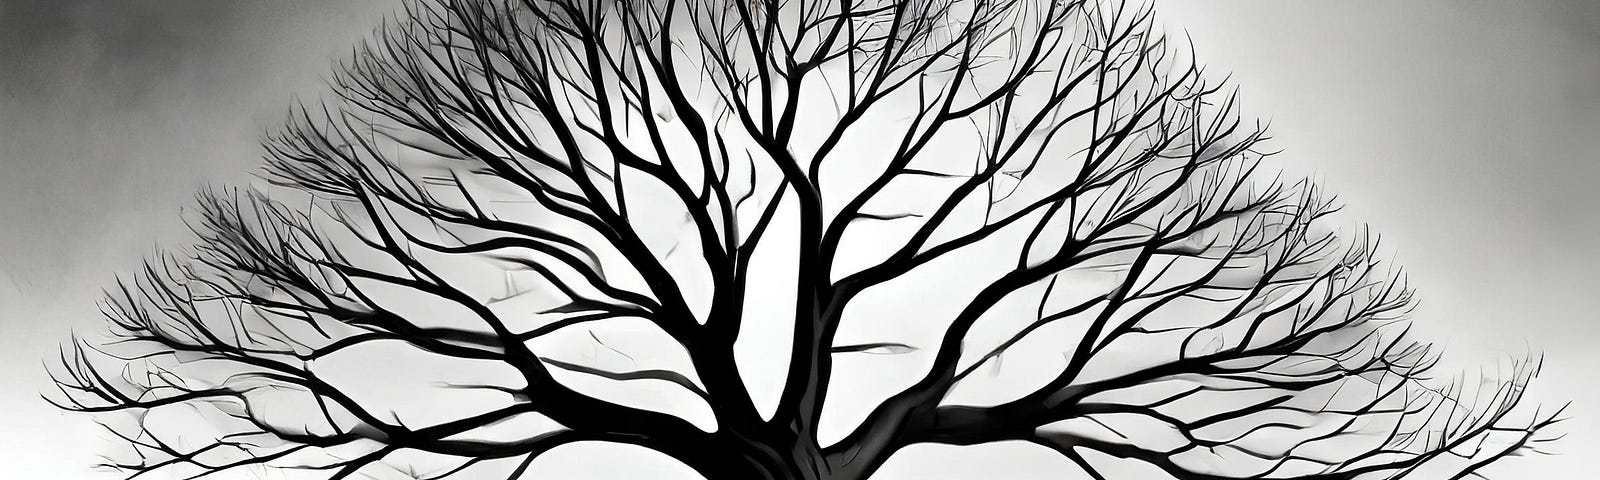 Art rendering of a tree without leaves